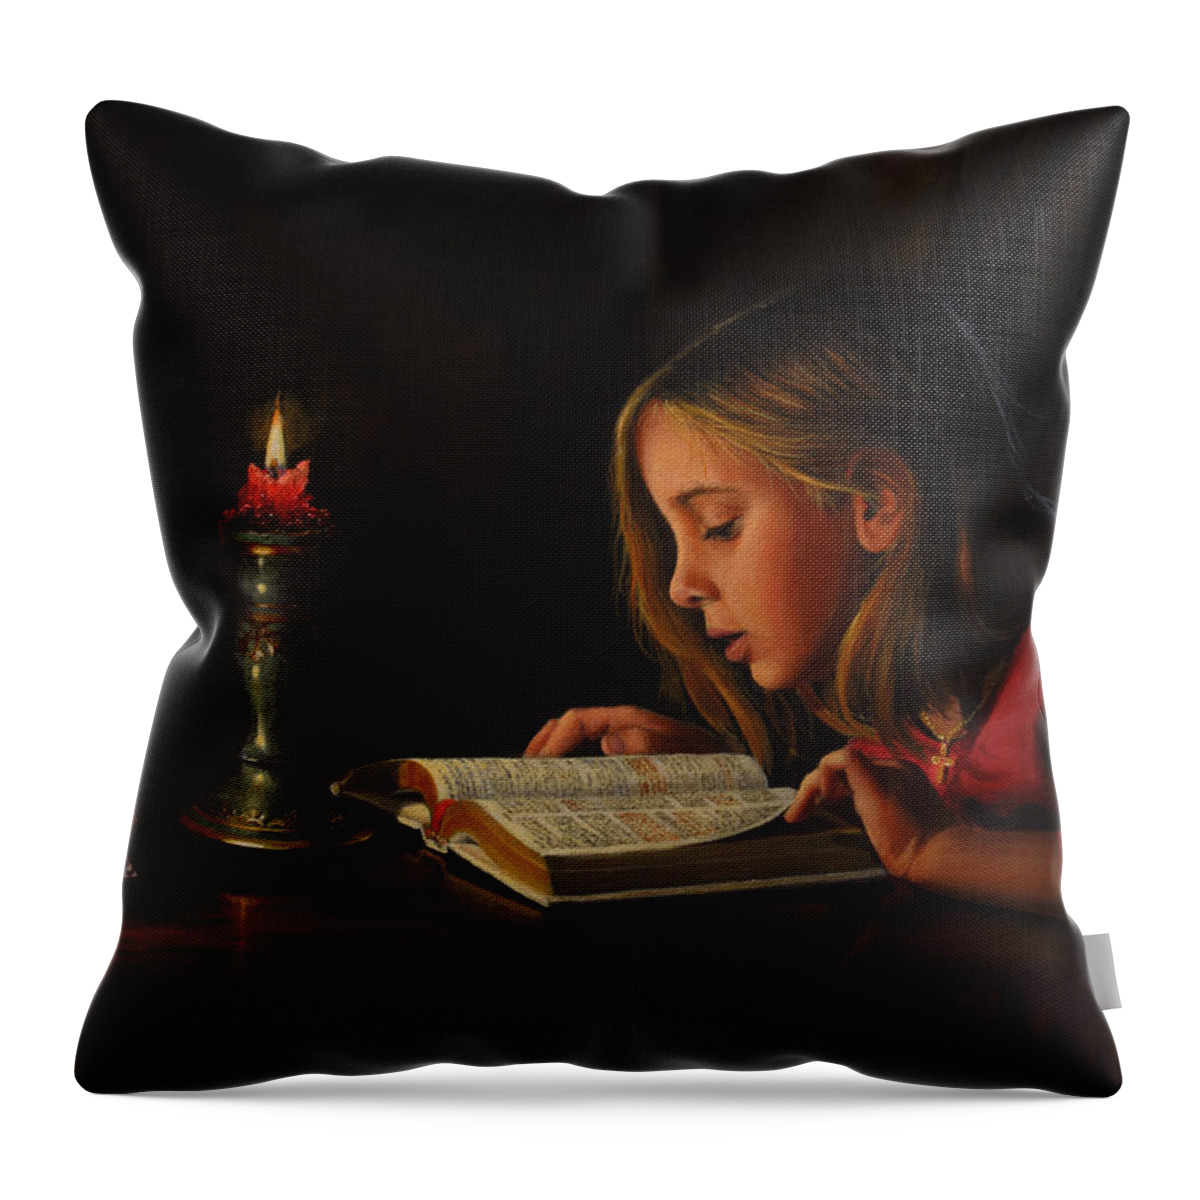 Religious Painting Throw Pillow featuring the painting Enlightenment by Glenn Beasley